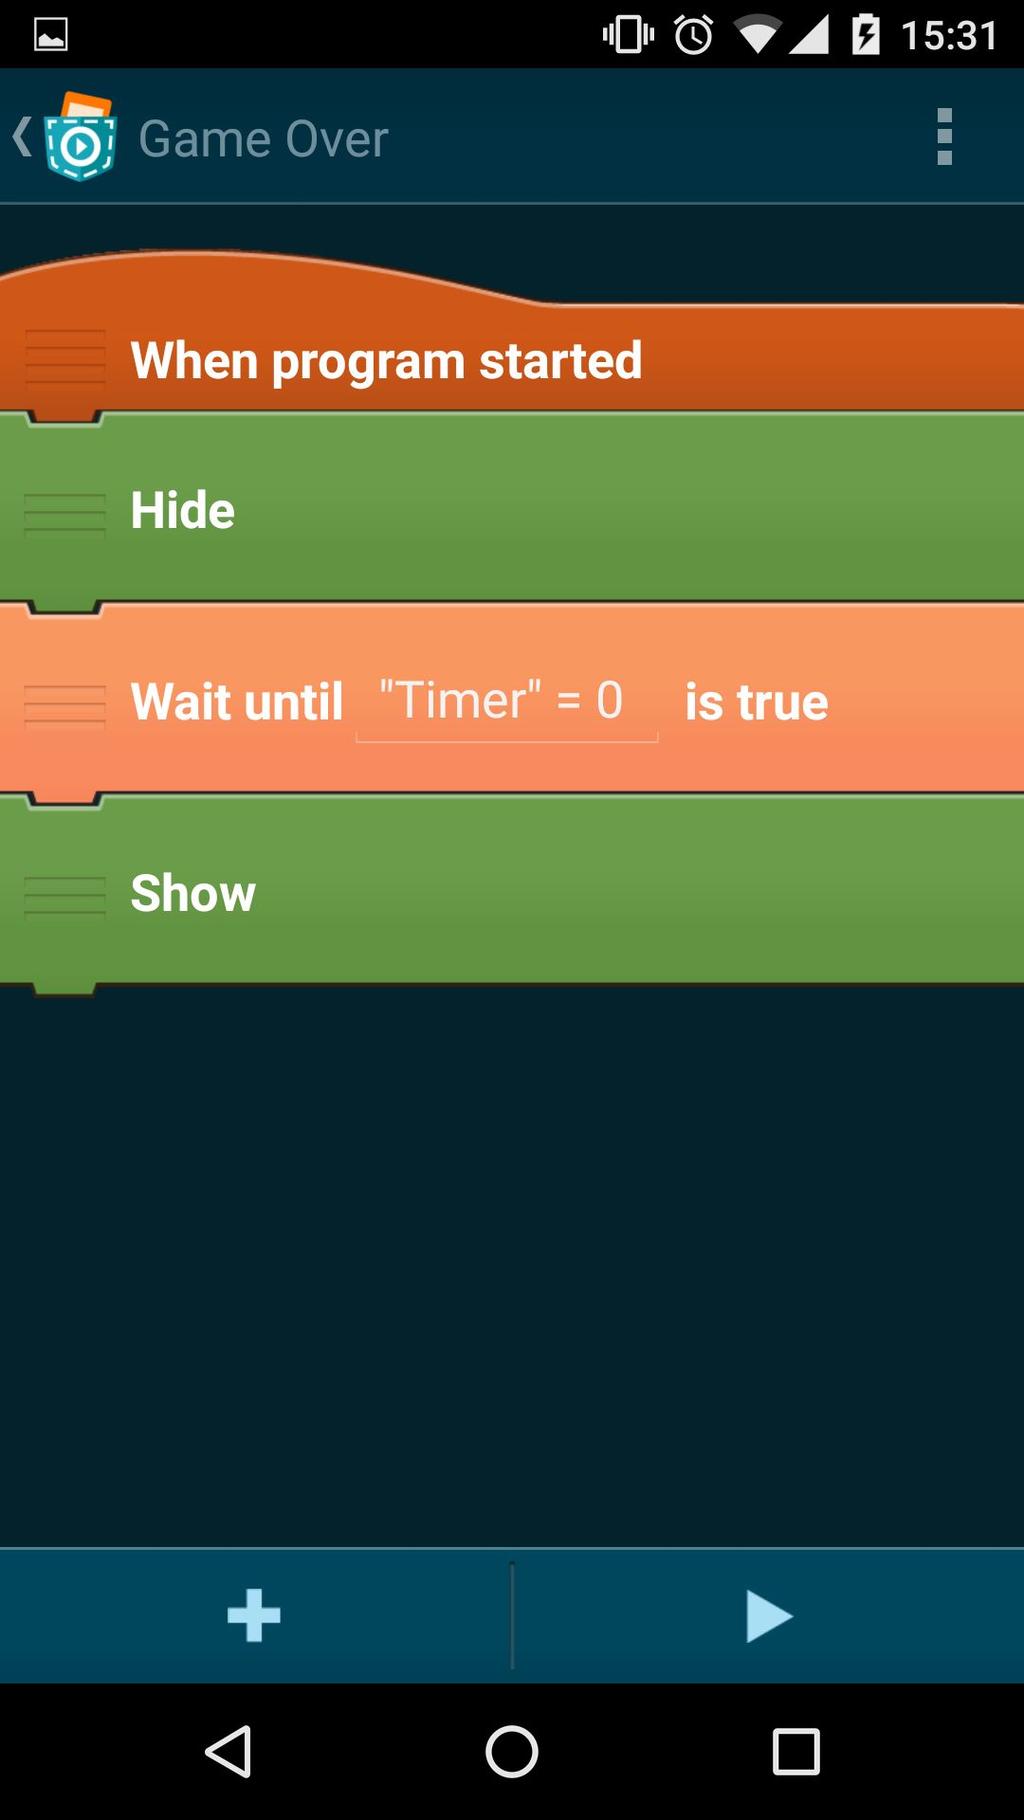 13) How can I add a timer to my game?